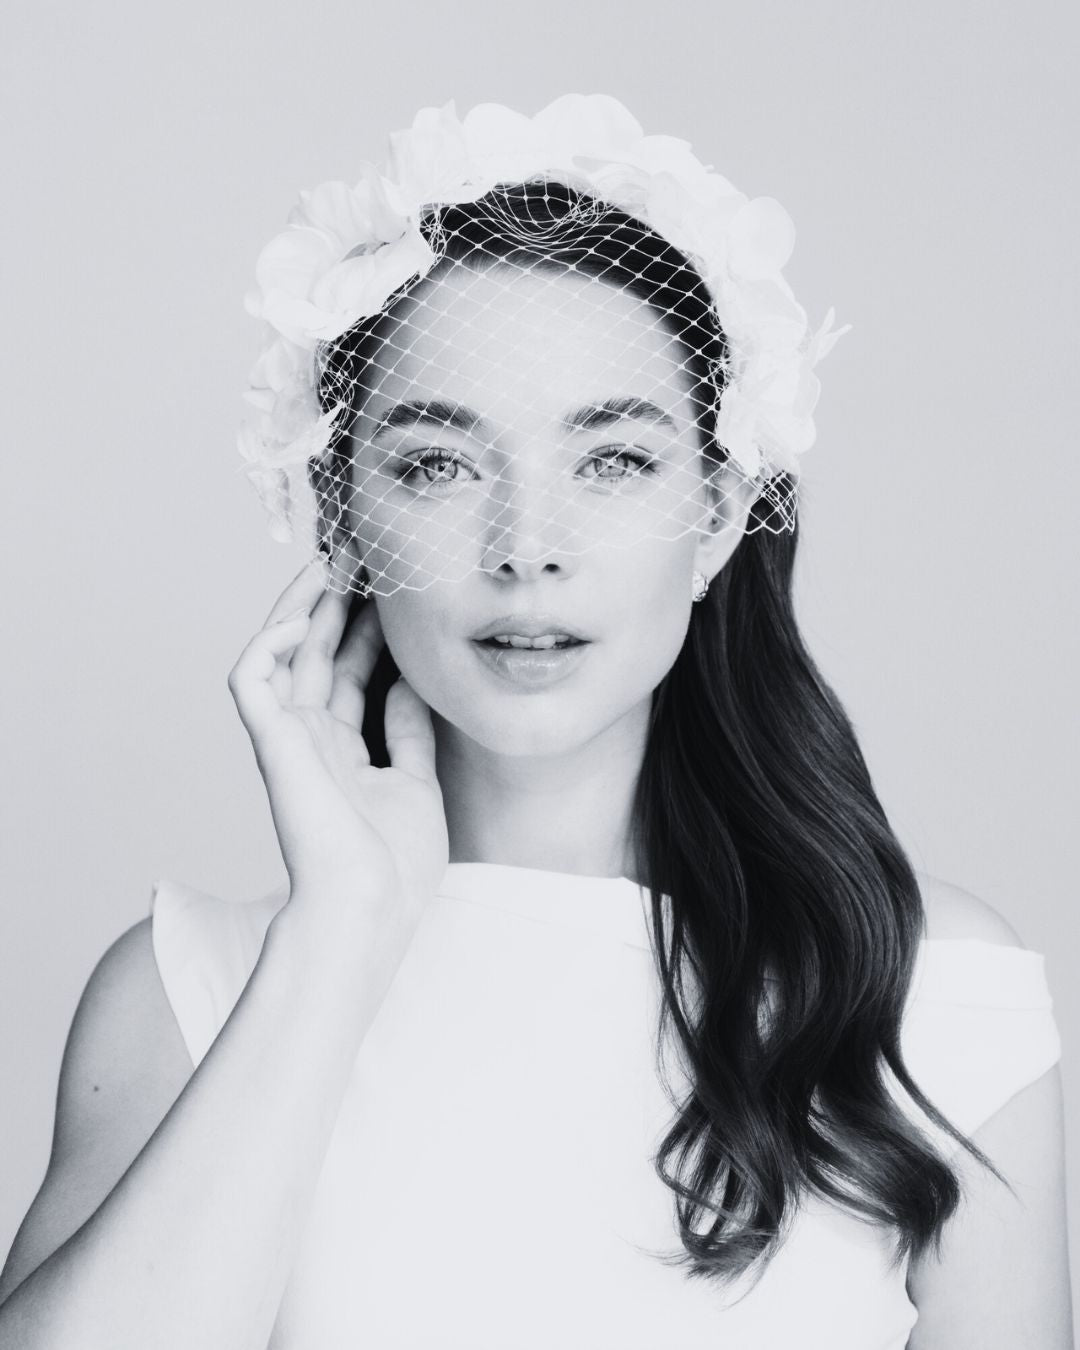 How to elevate your bridal look with a designer headpiece